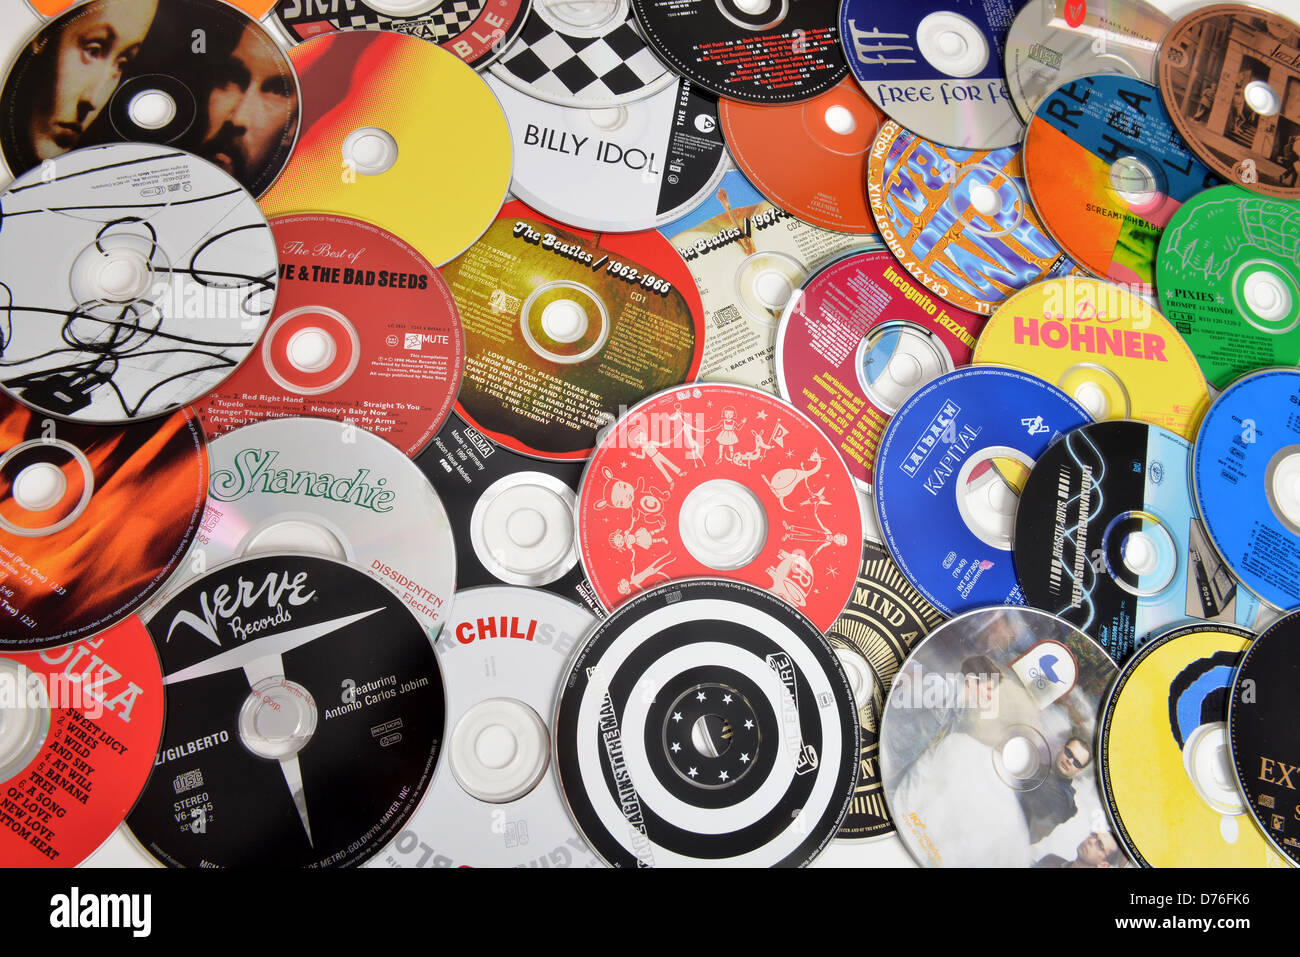 Cd cds music hi-res stock photography and images - Alamy